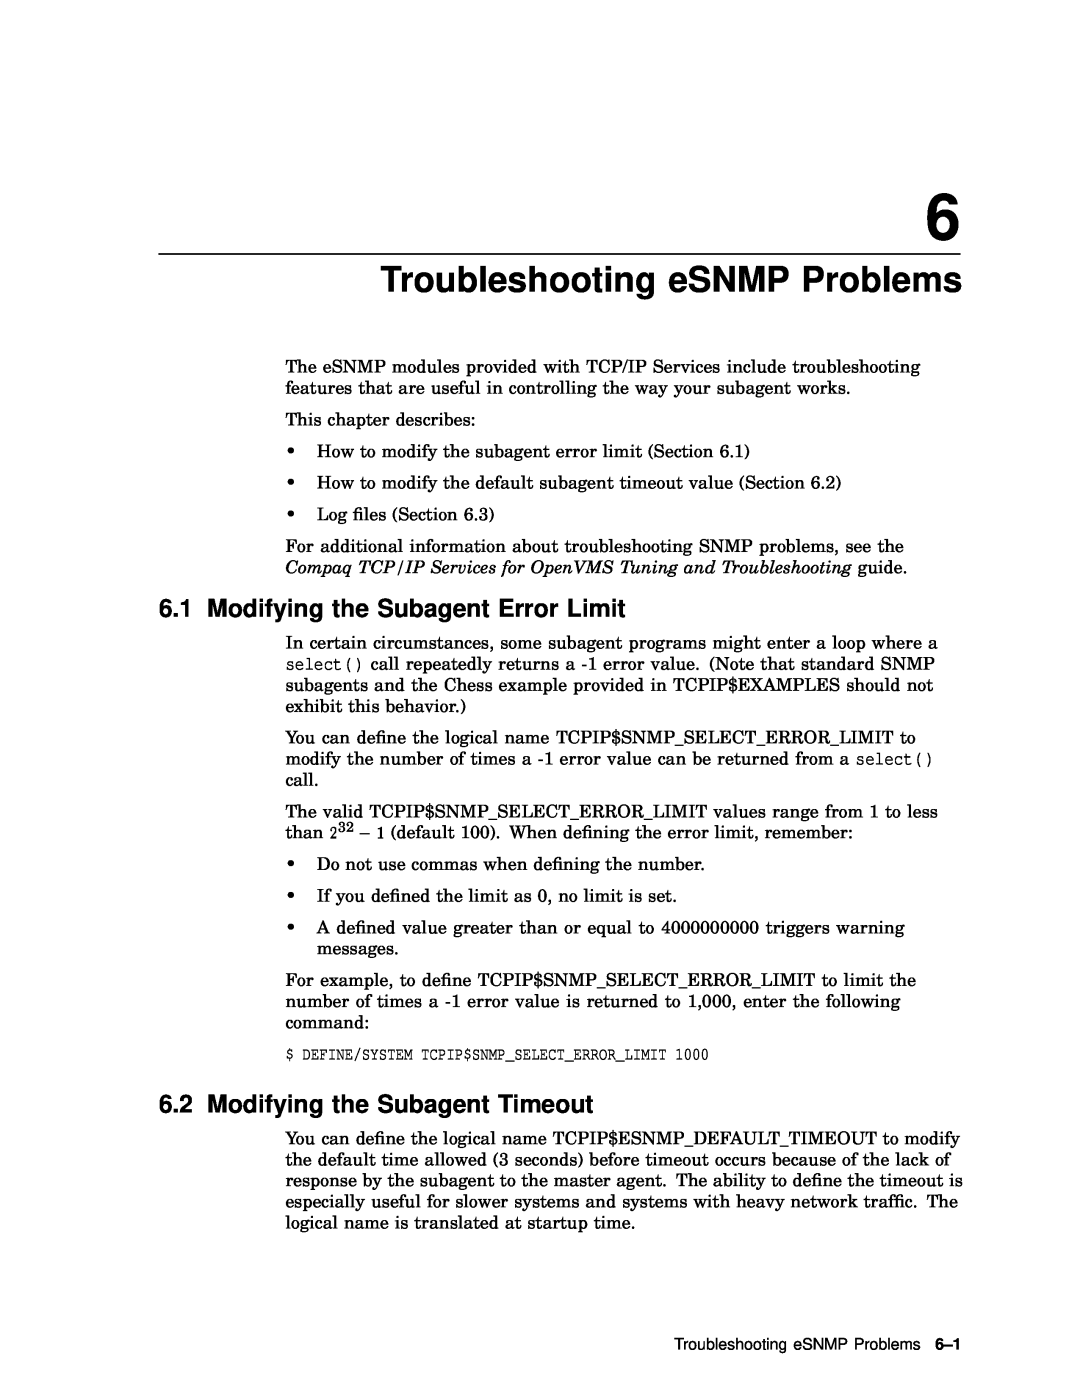 Compaq AAR04BCTE manual Troubleshooting eSNMP Problems, Modifying the Subagent Error Limit, Modifying the Subagent Timeout 